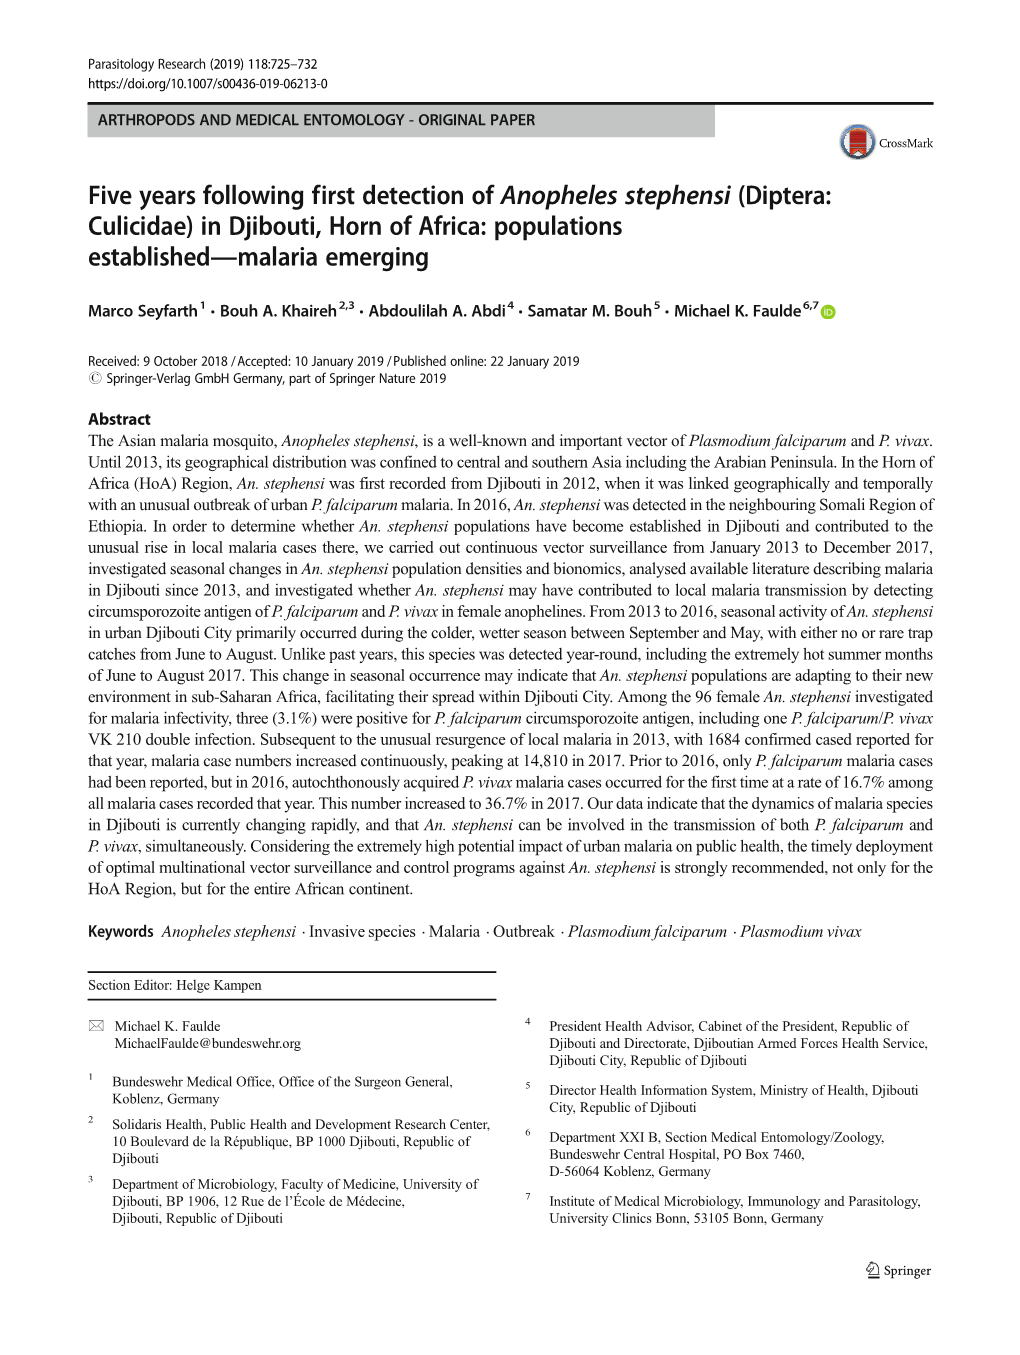 Five Years Following First Detection of Anopheles Stephensi (Diptera: Culicidae) in Djibouti, Horn of Africa: Populations Established—Malaria Emerging